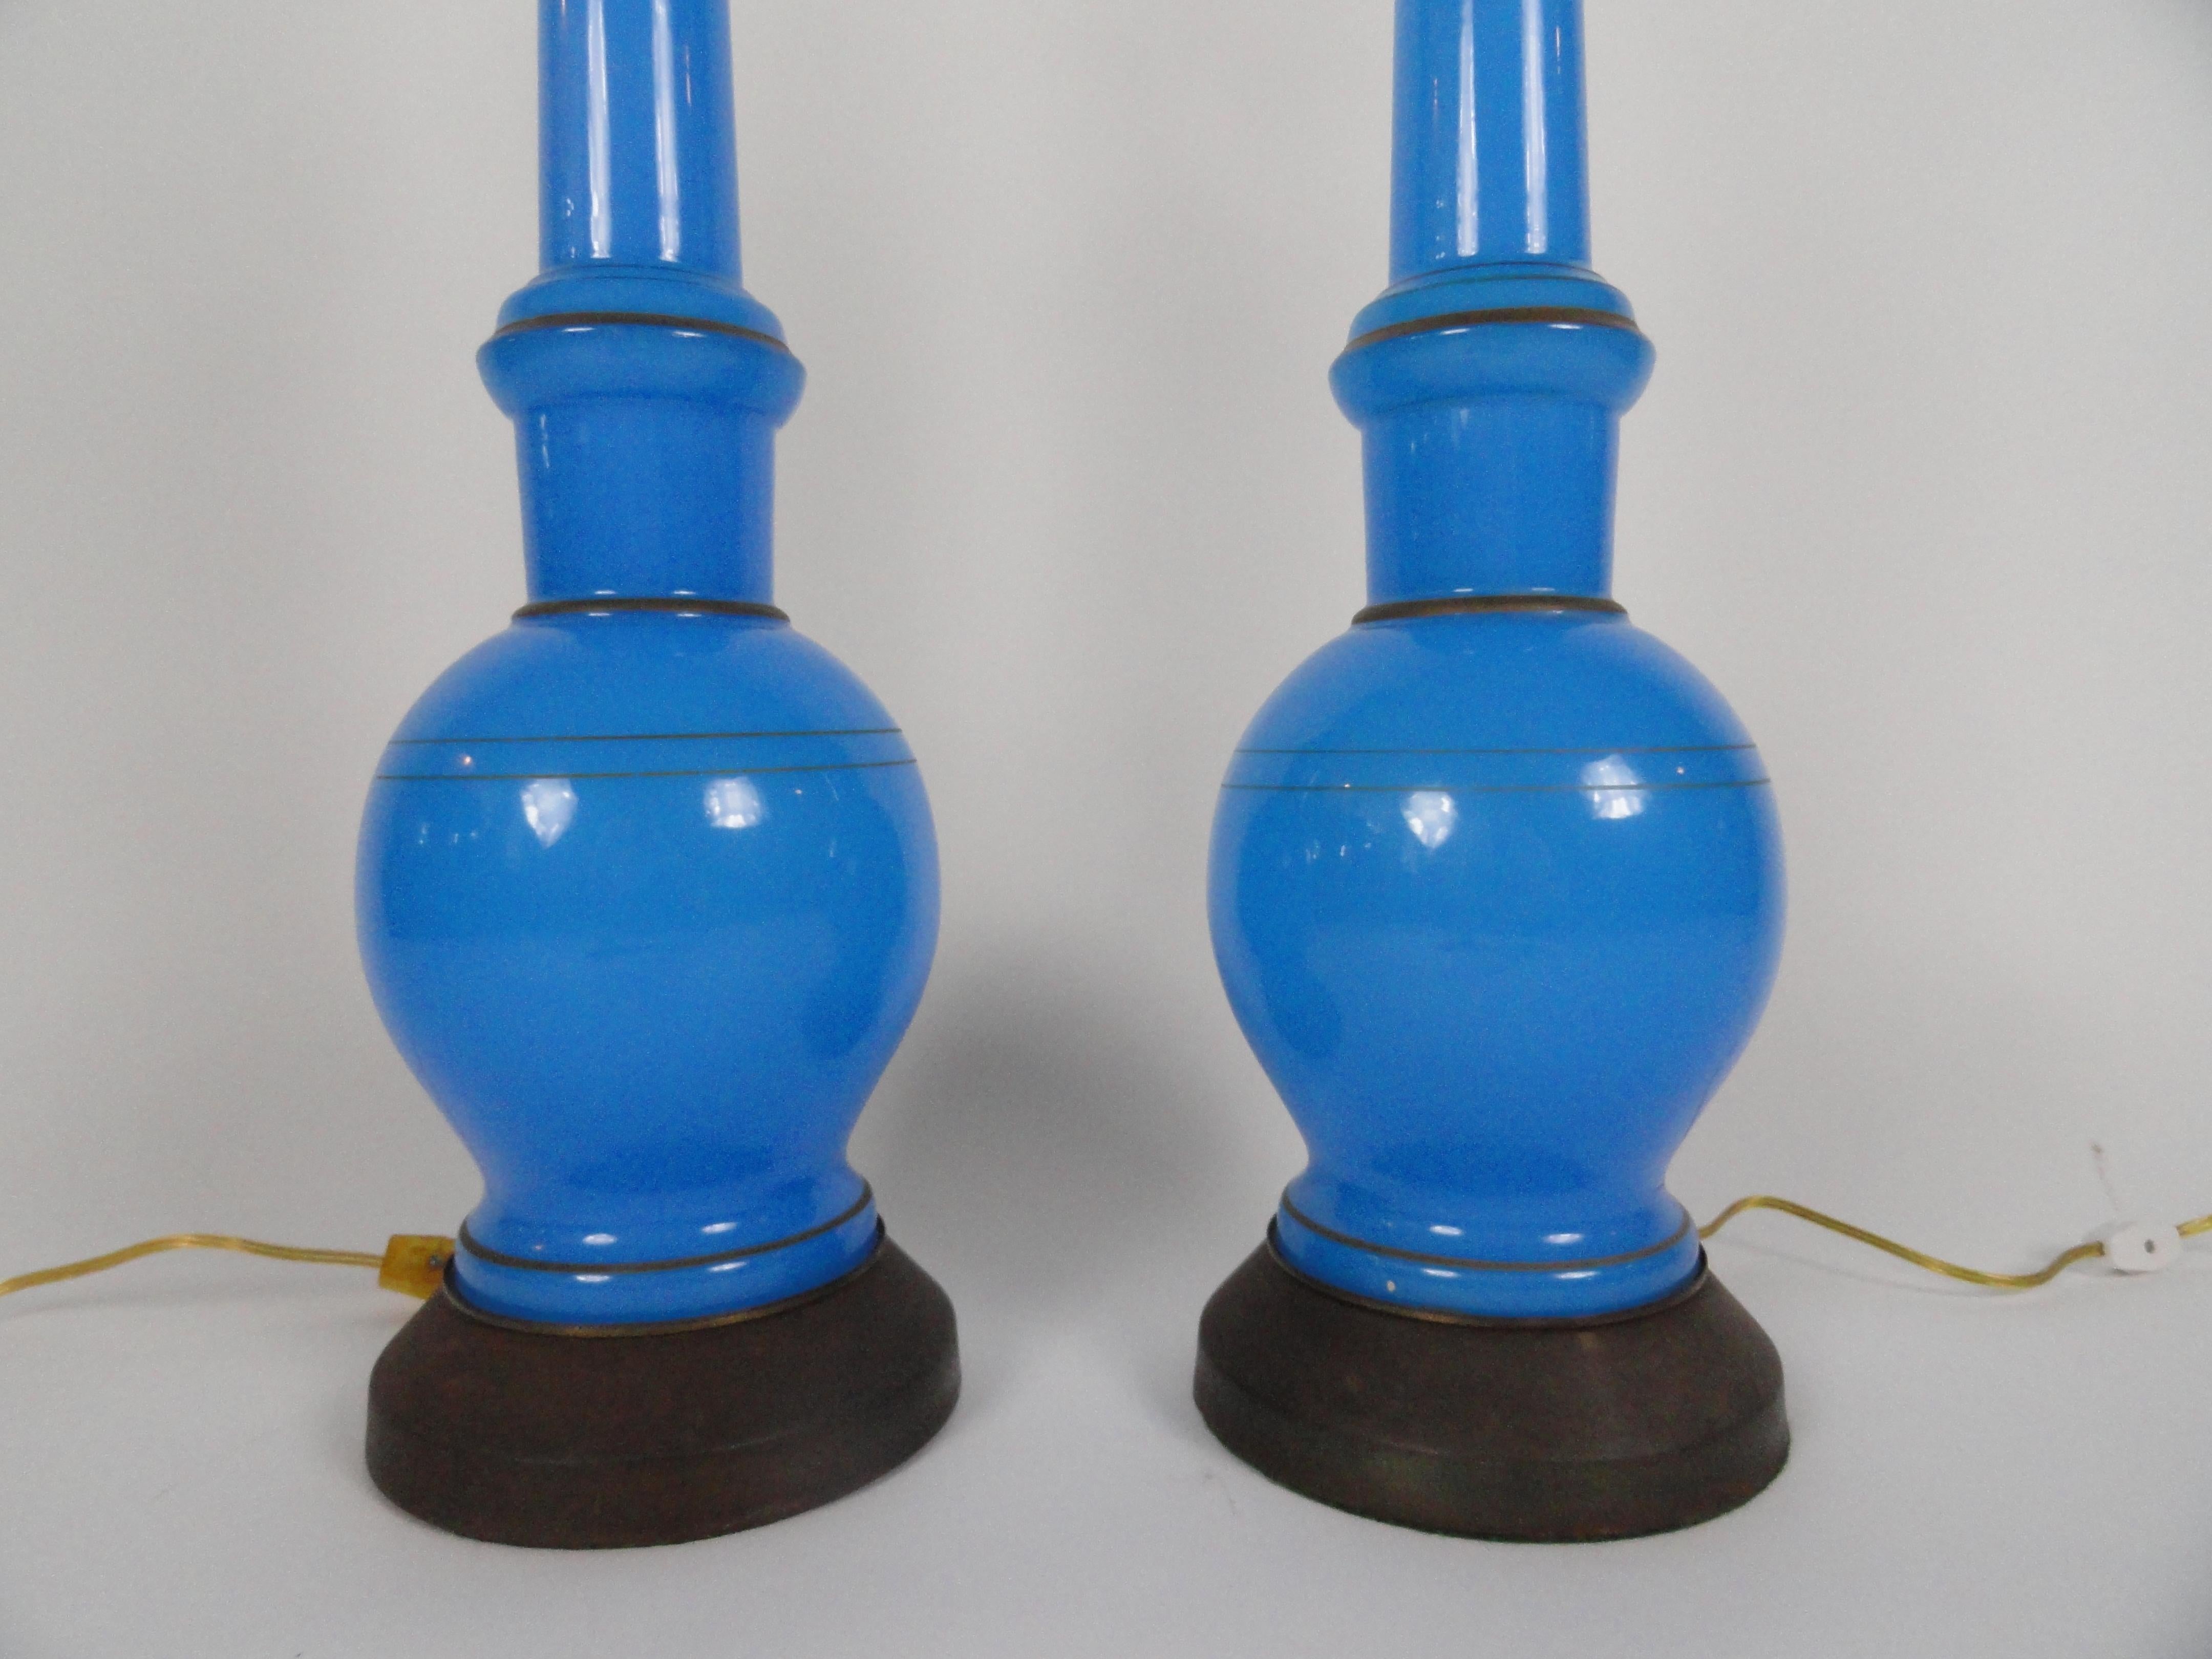 Pair of Russian blue opaline glass lamps with applied gilt decoration on patina brass bases. These are truly beautiful lamps with a spectacular blue color. Rewired with inline switches.